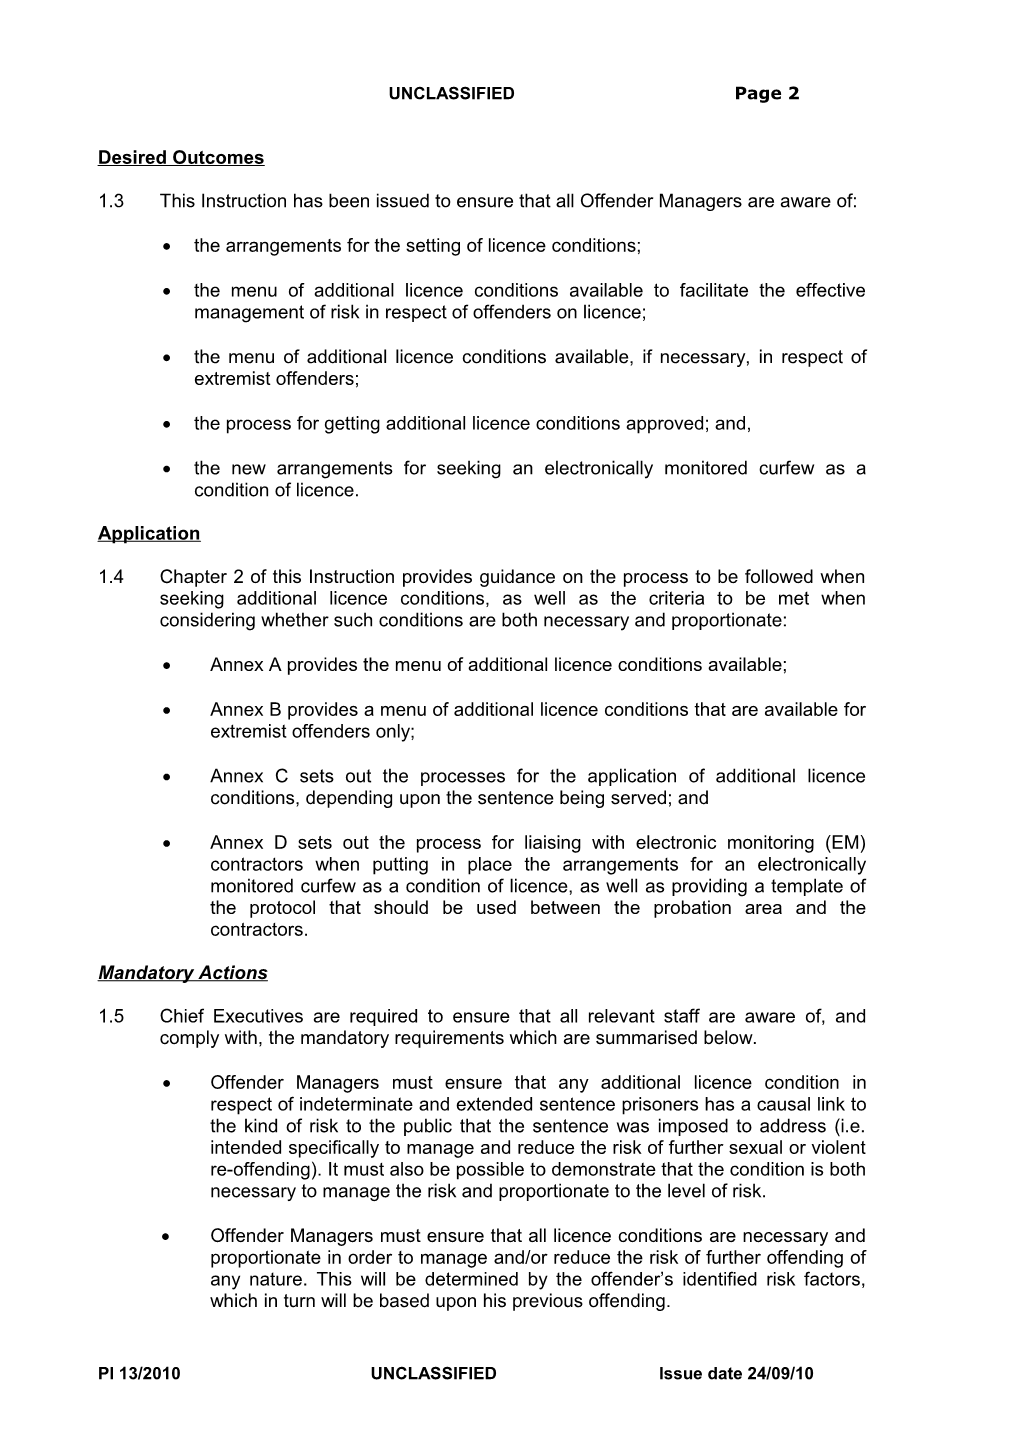 Probation Instruction 13-2010 - Licence Conditions